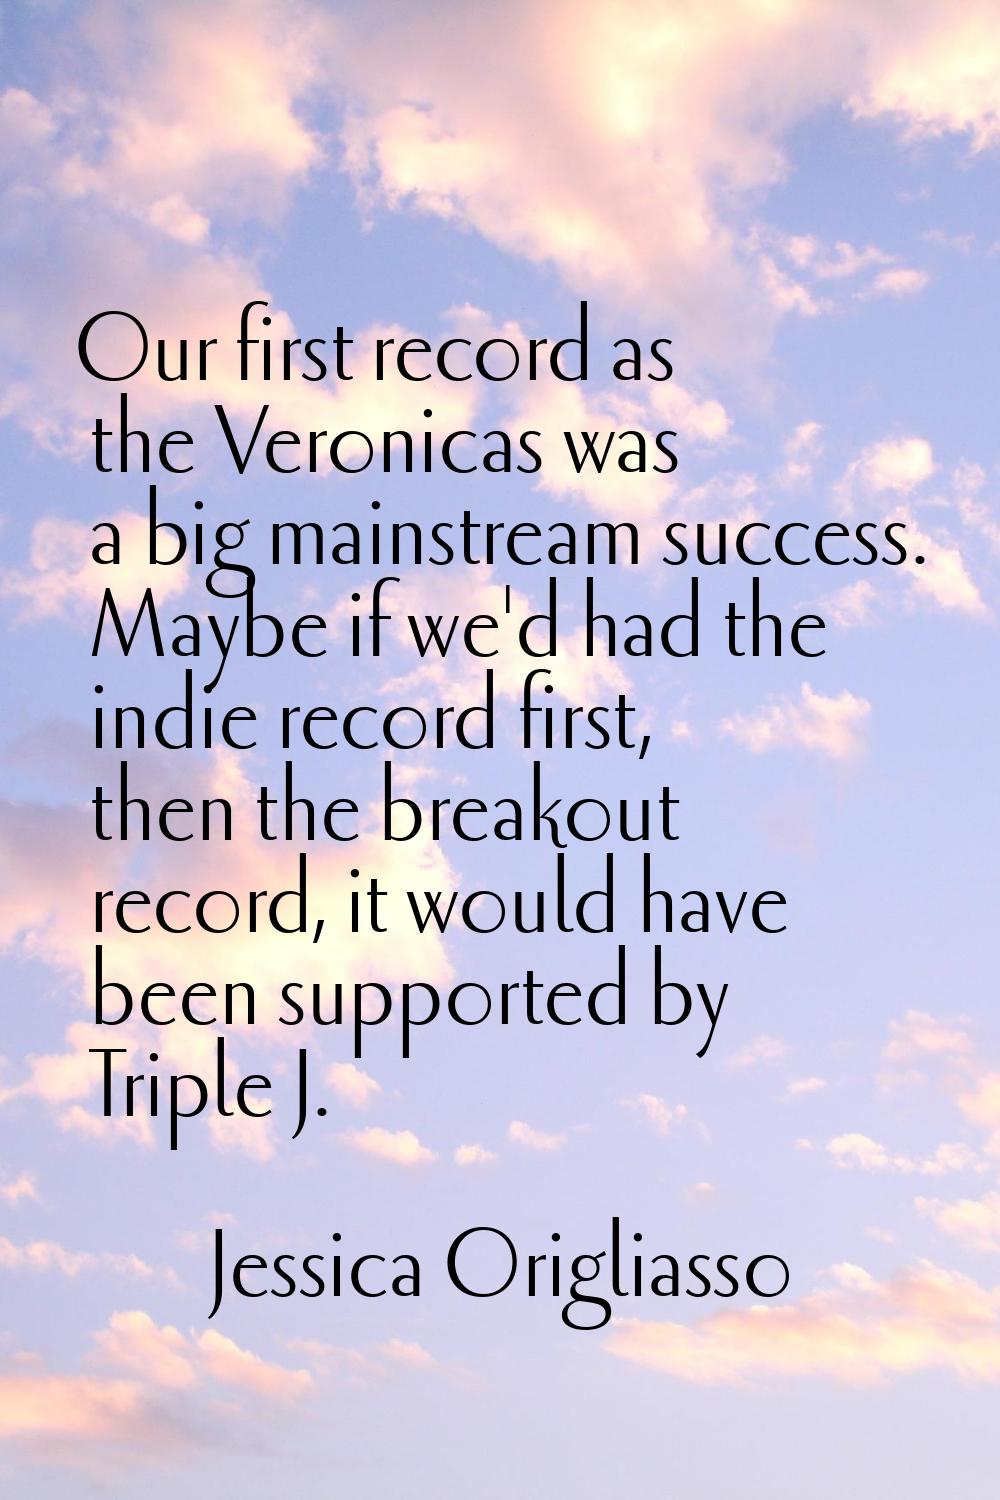 Our first record as the Veronicas was a big mainstream success. Maybe if we'd had the indie record 